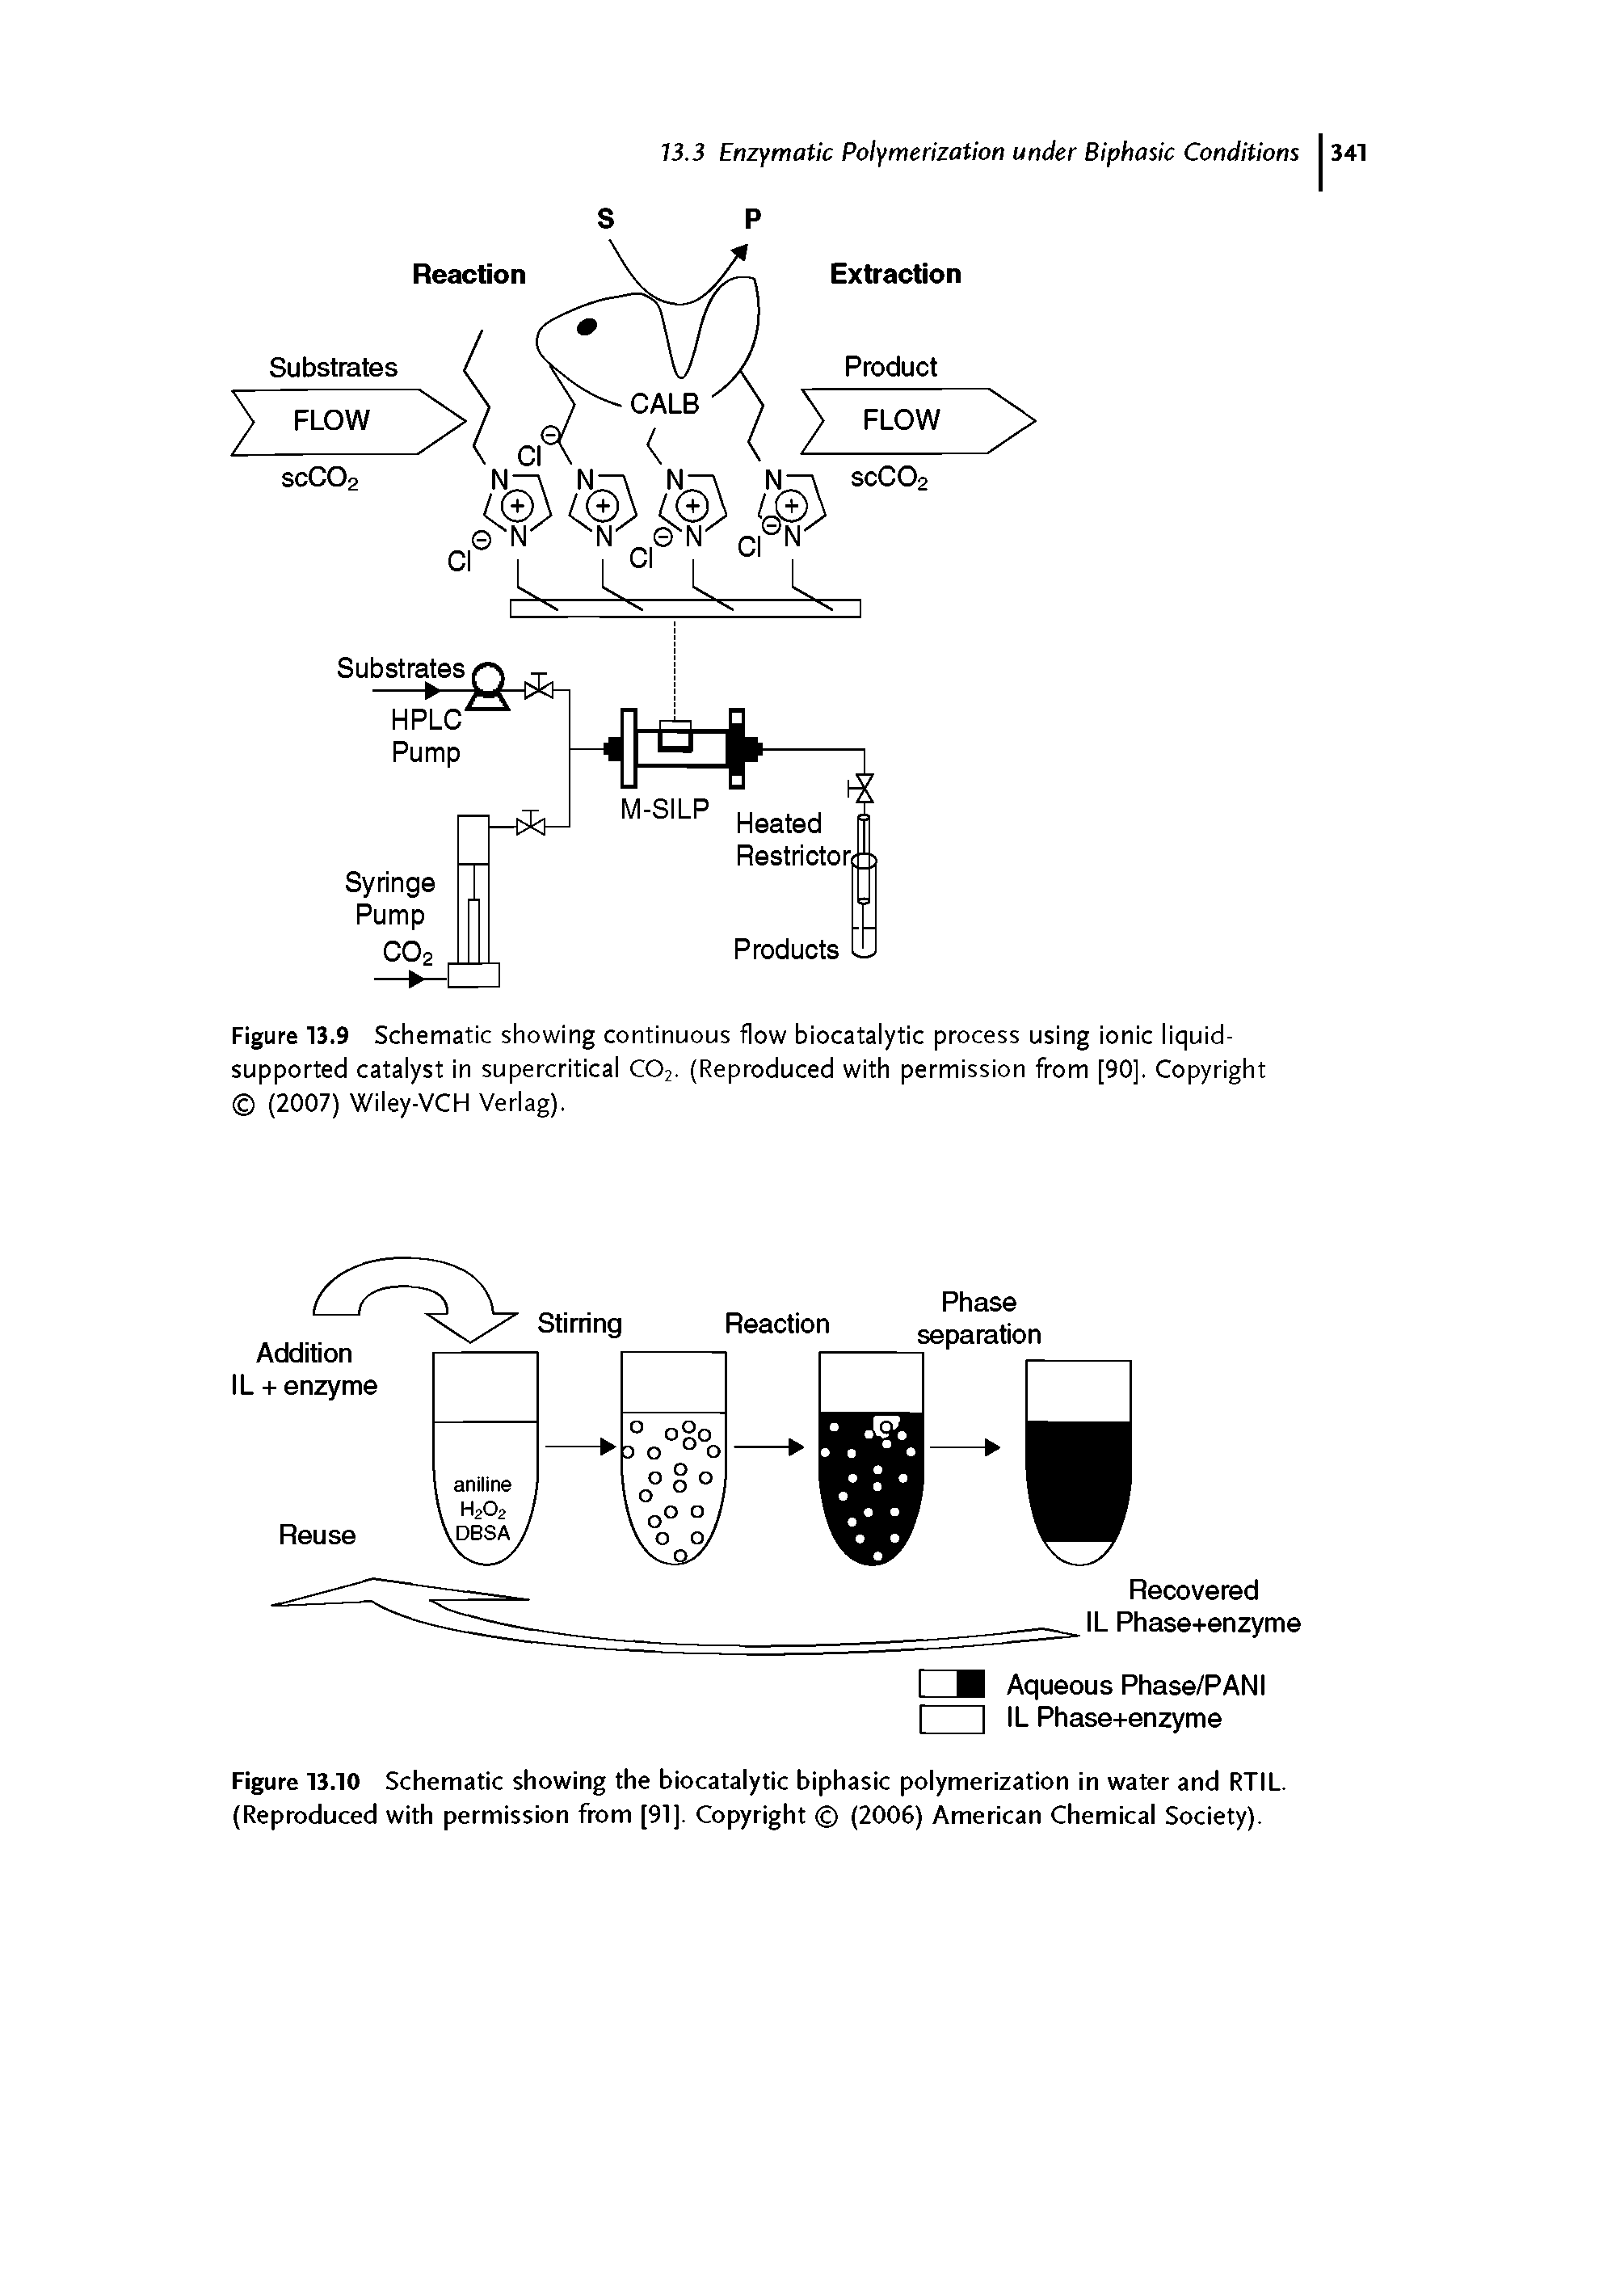 Figure 13.9 Schematic showing continuous flow biocatalytic process using ionic liquid-supported catalyst in supercritical C02. (Reproduced with permission from [90]. Copyright (2007) Wiley-VCH Verlag).